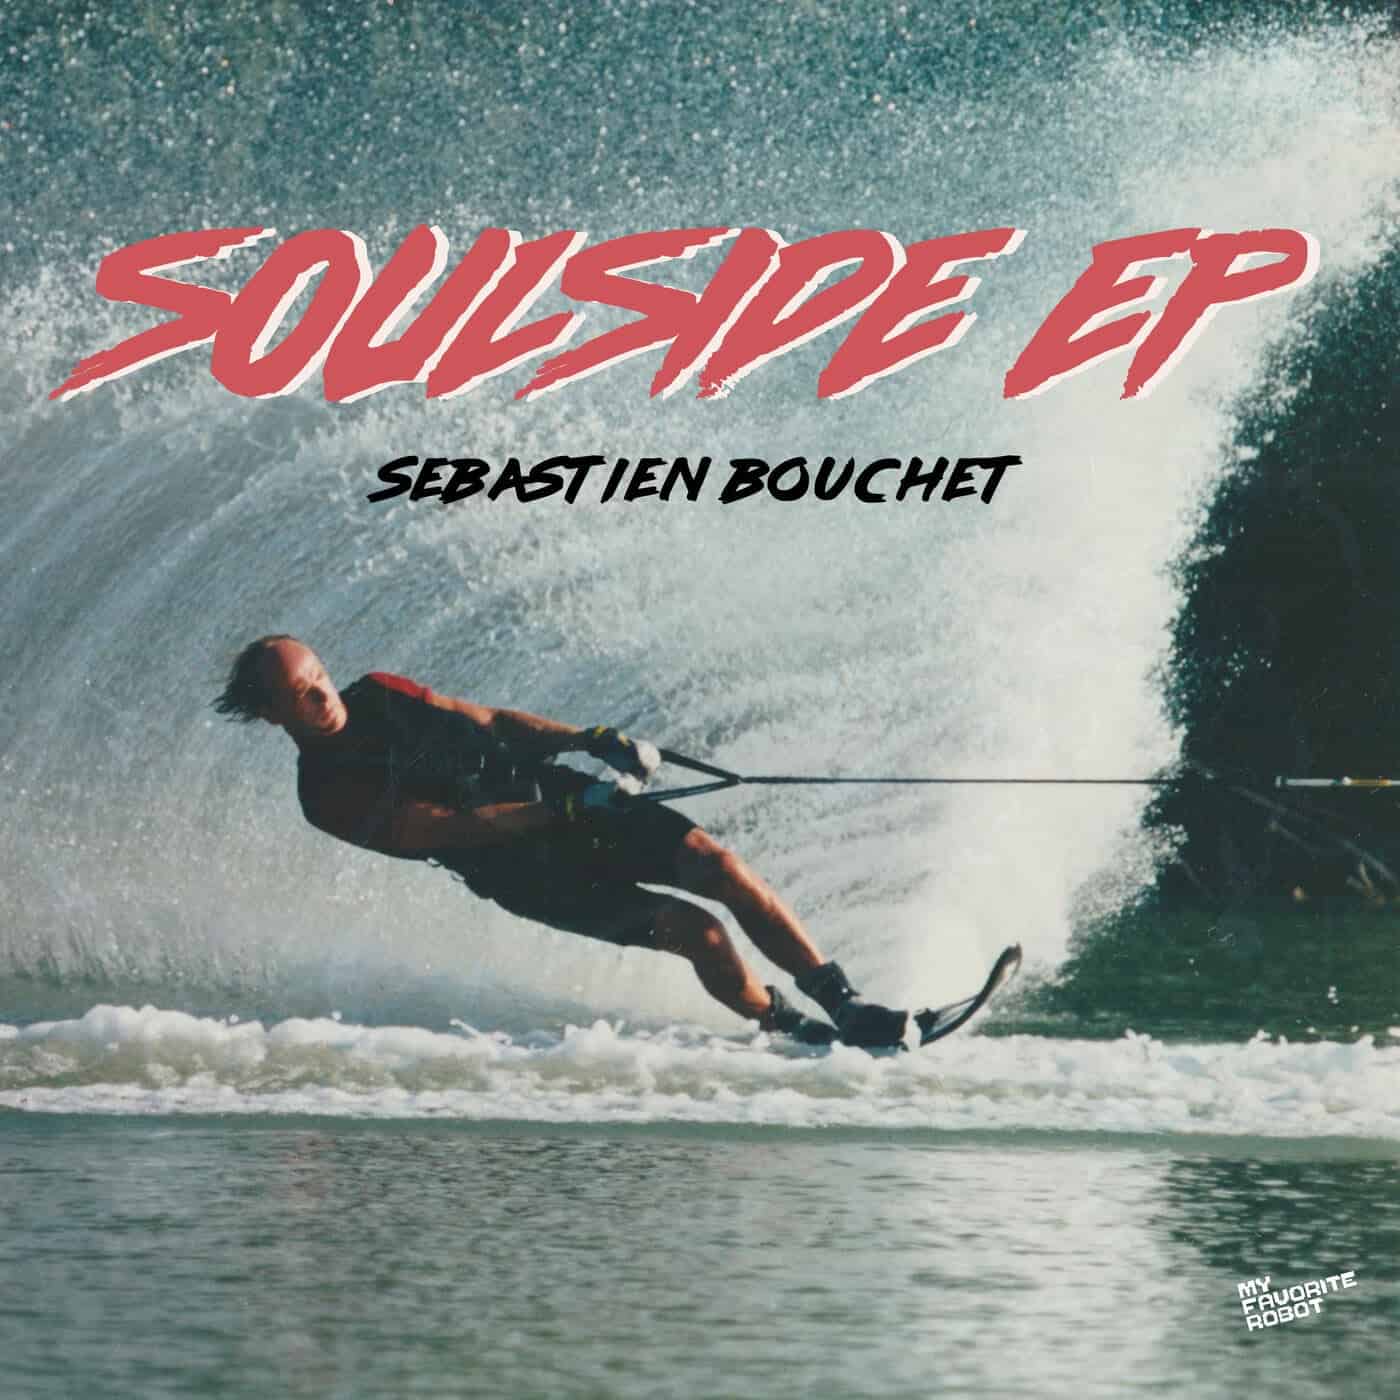 Download Soulside EP on Electrobuzz